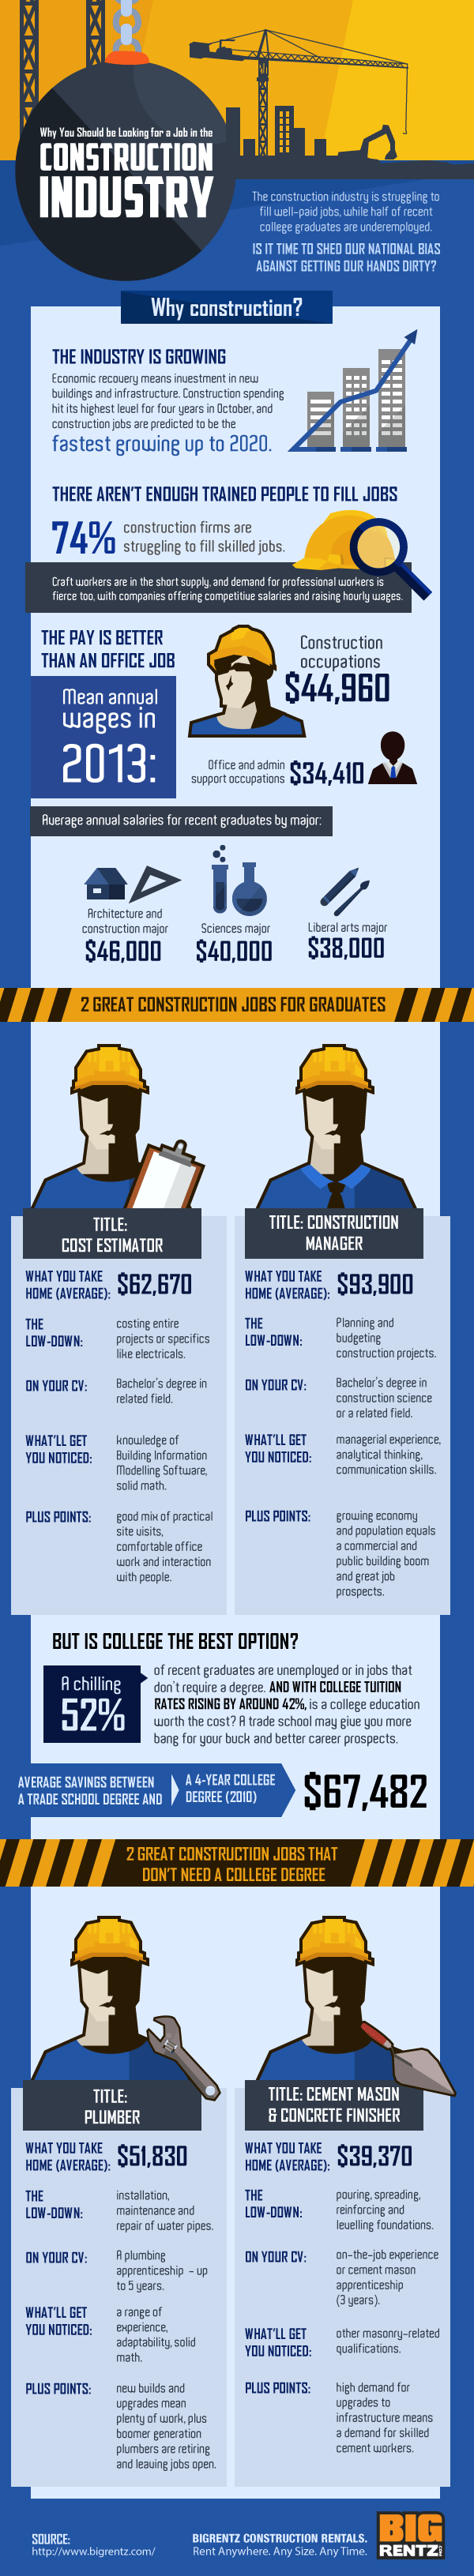 Construction Careers vs. College Education: Which Pays Out More?